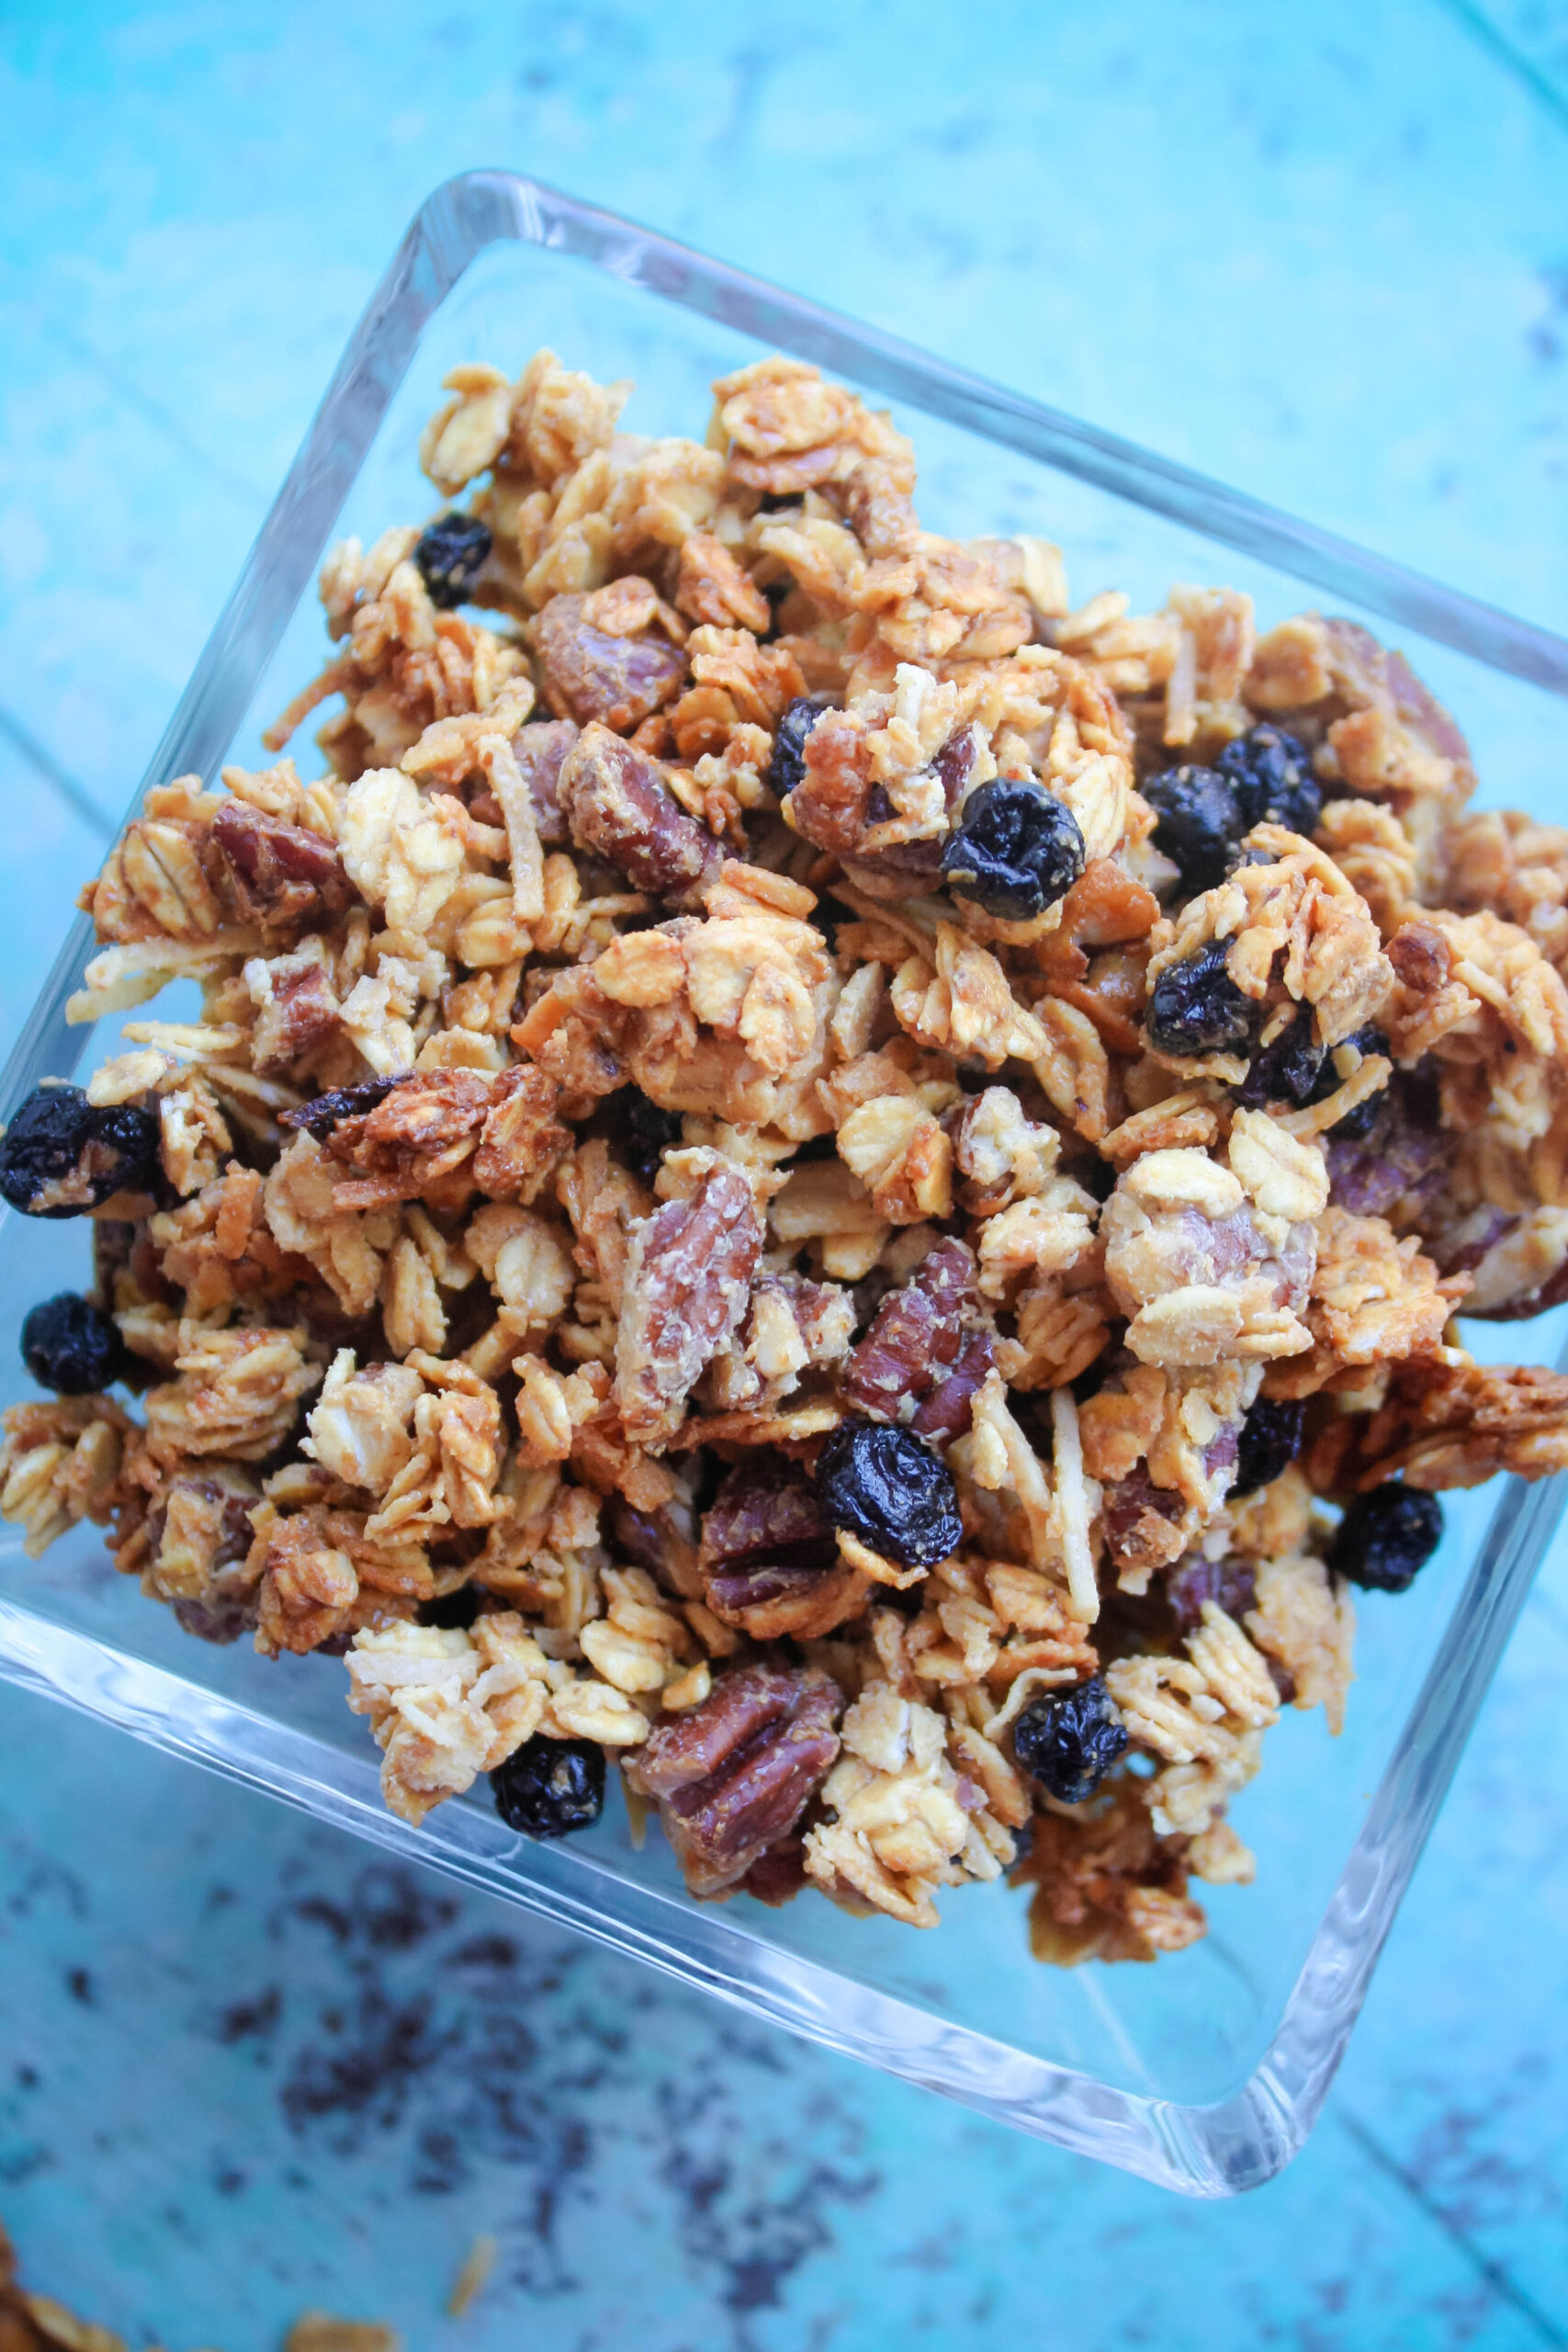 Looking down on a bowl of granola filled with blueberries and pecans